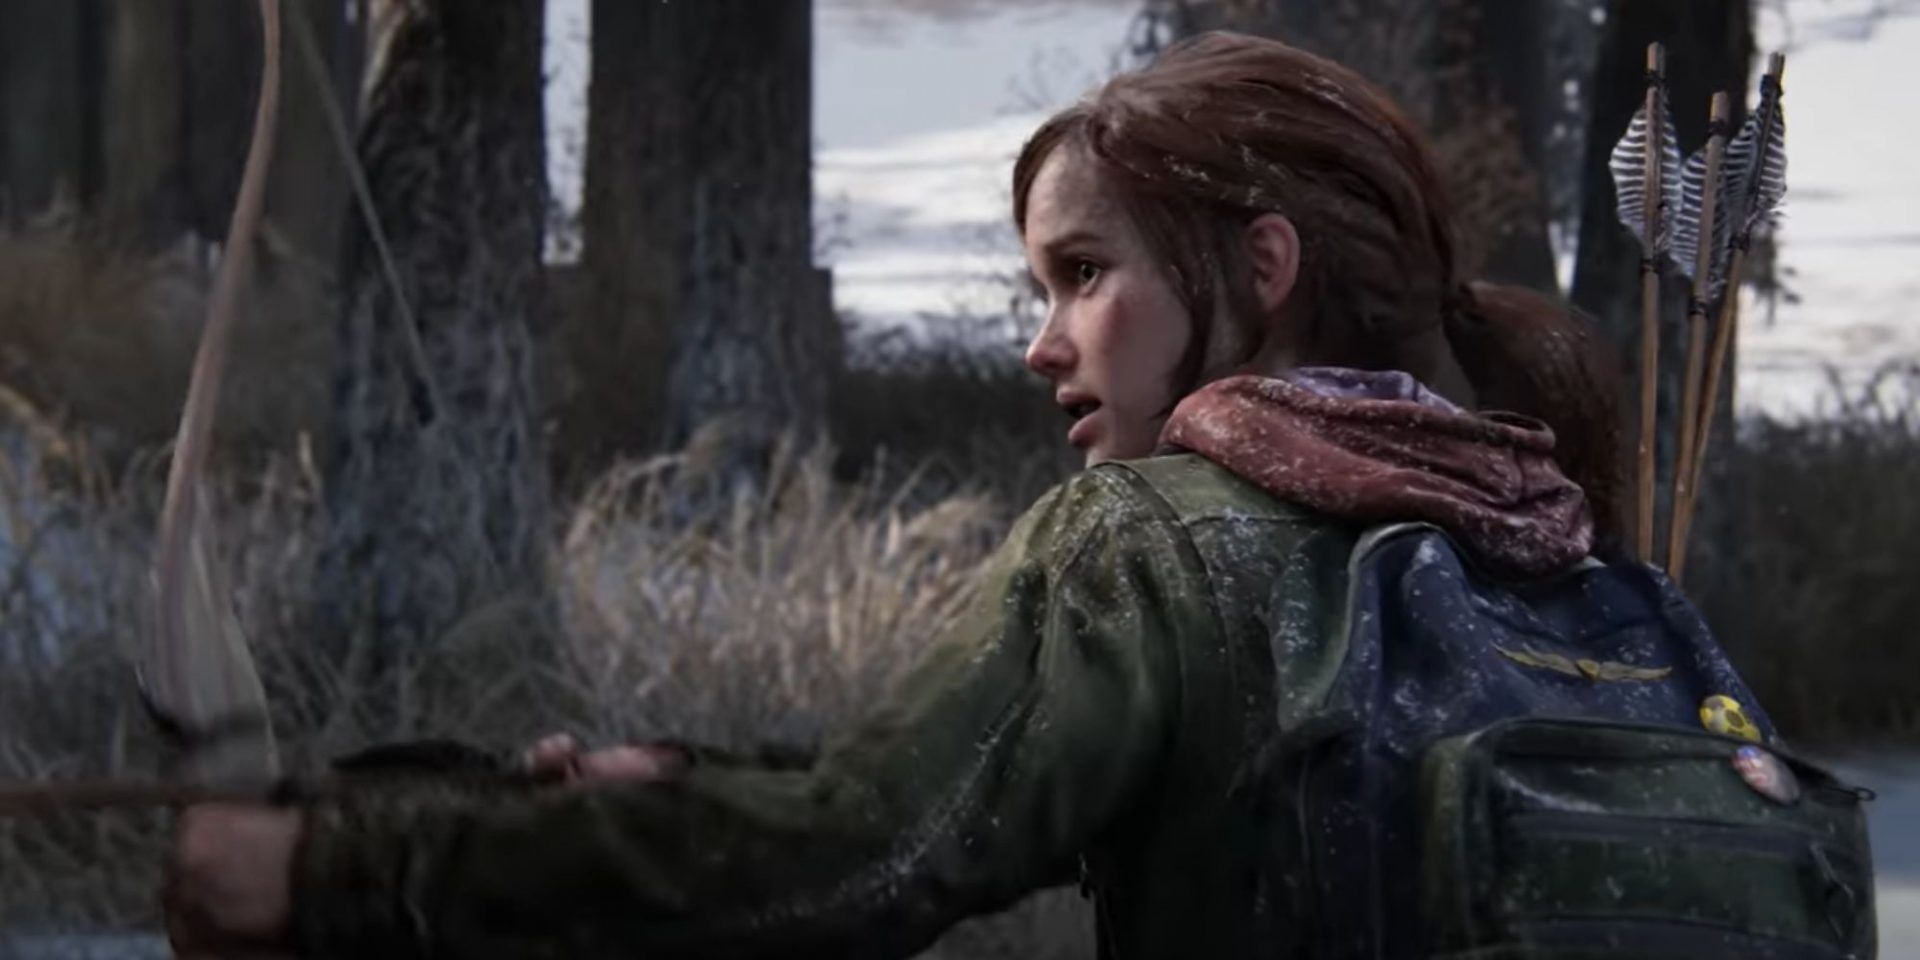 Ellie draws her bow looking to fire an arrow